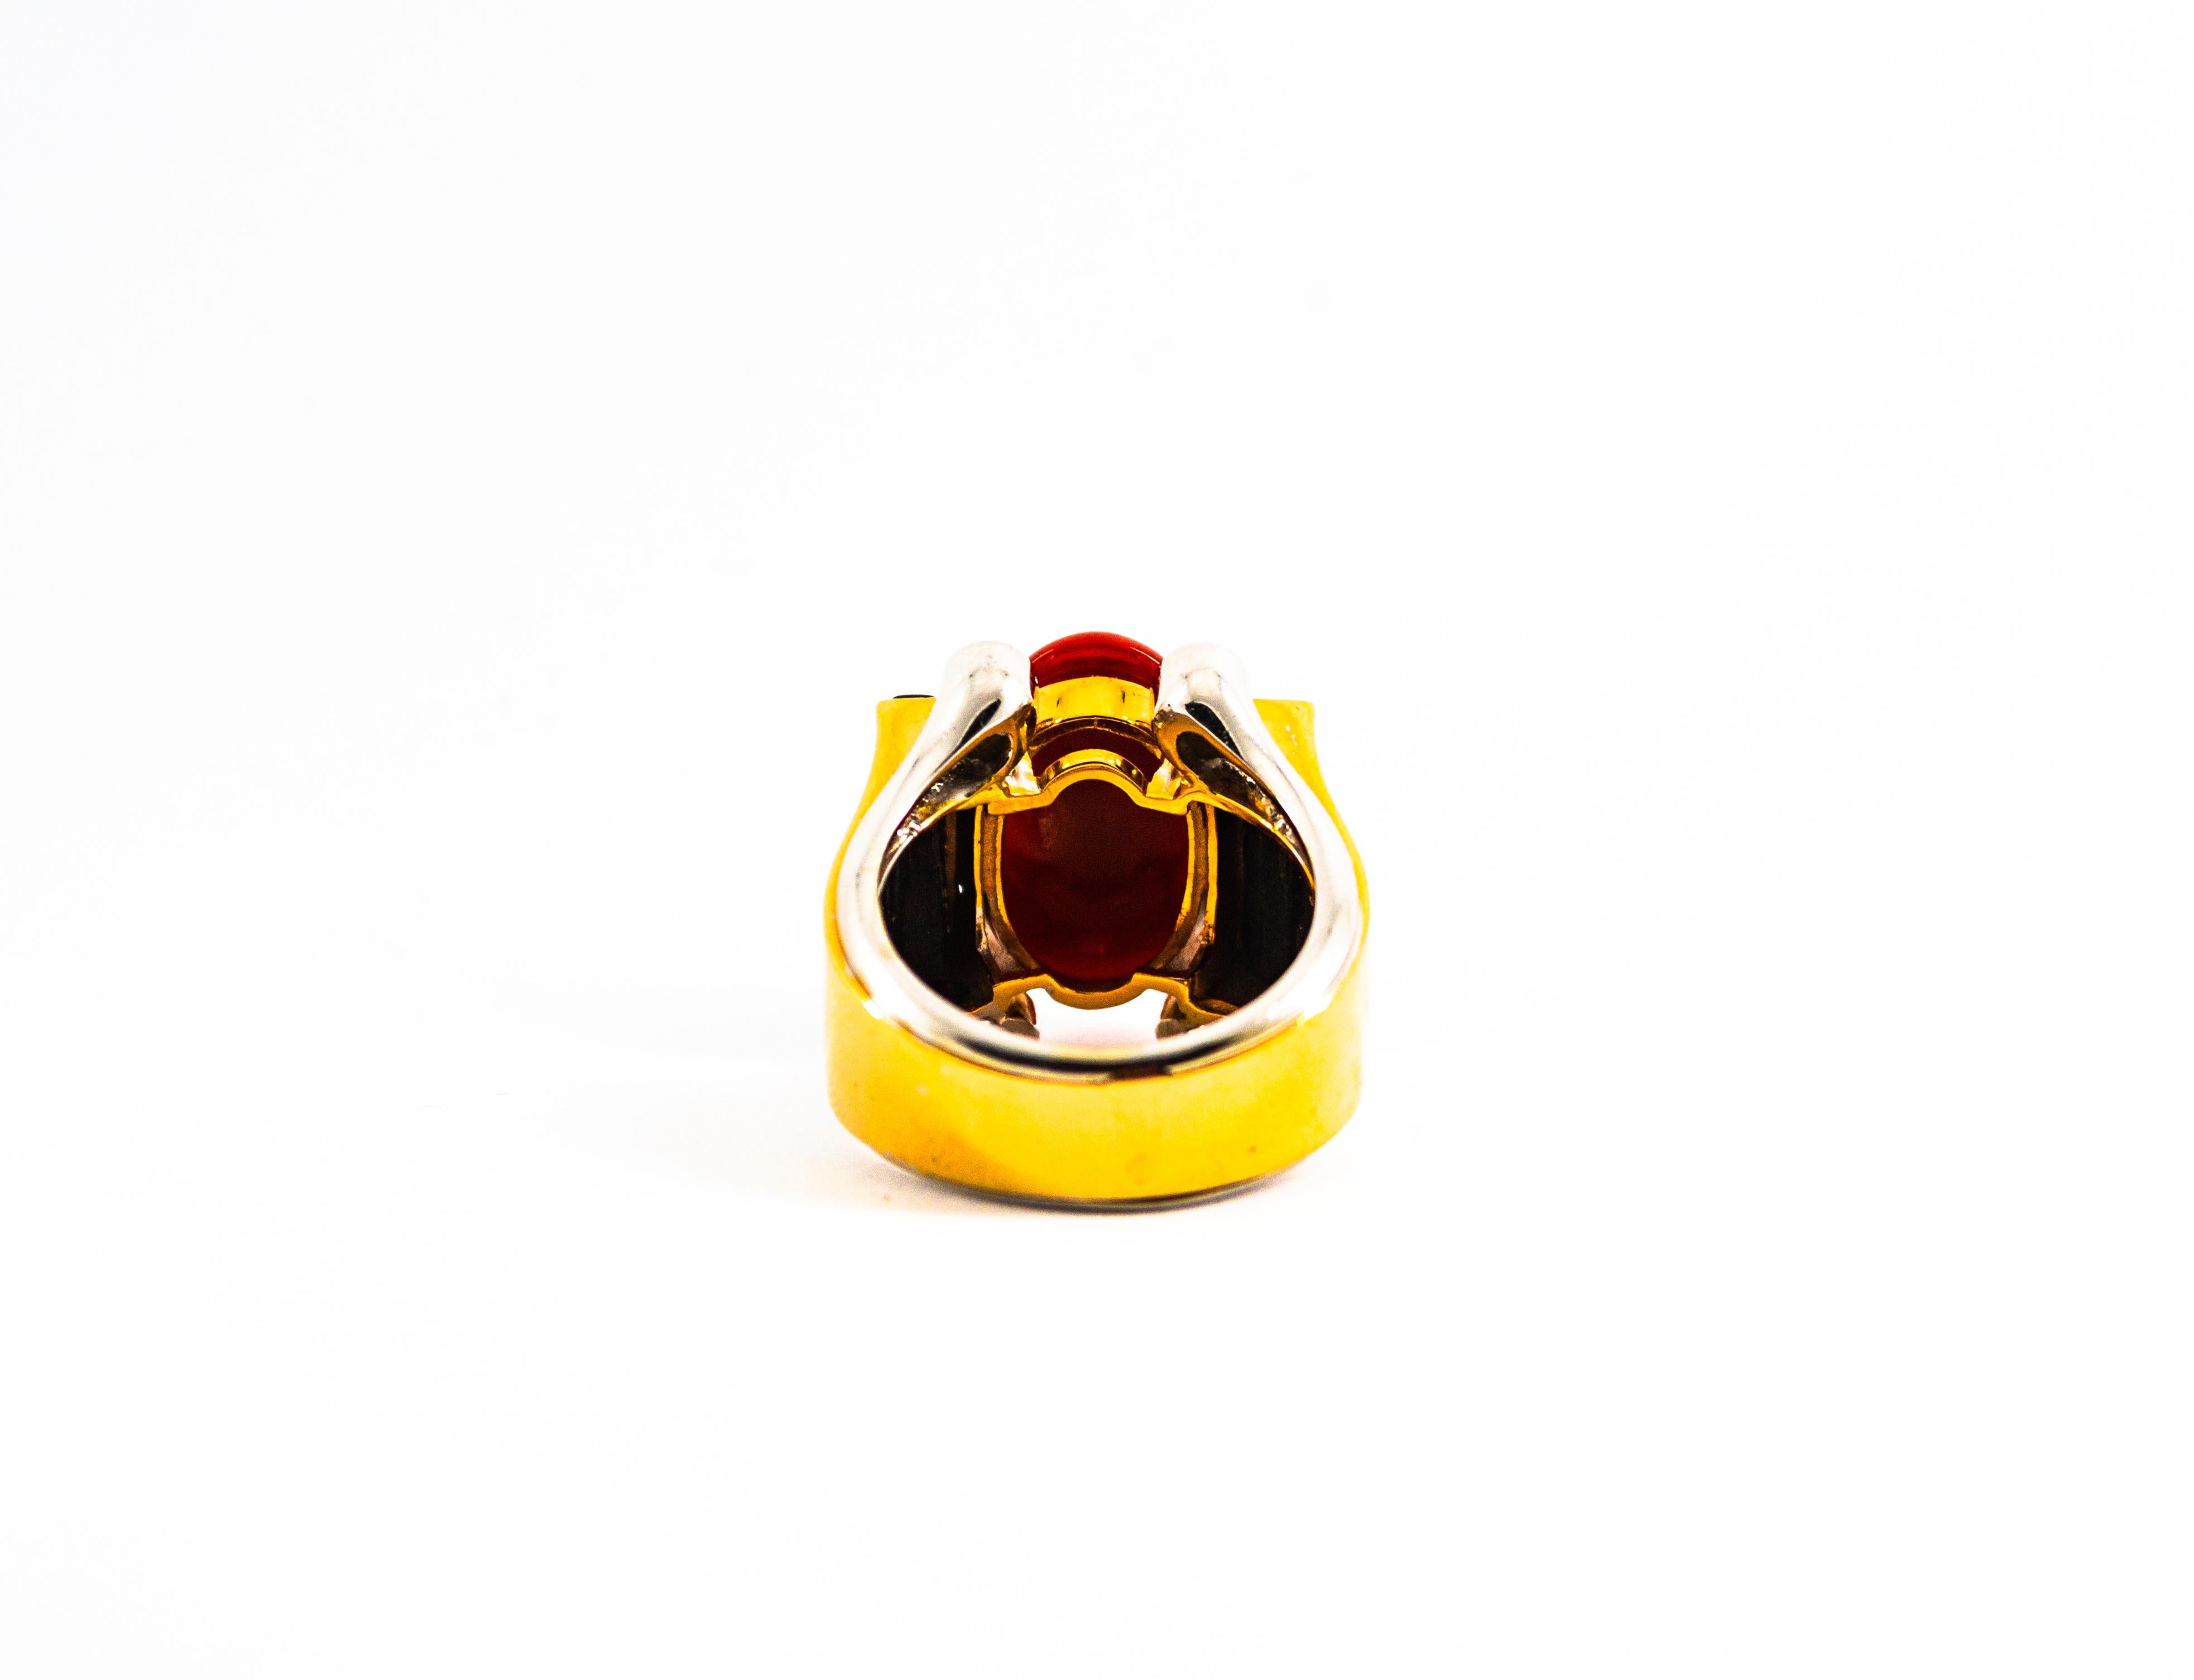 This Ring is made of 14K Yellow Gold.
This Ring has 0.30 Carats of White Moder Round Cut Diamonds.
This Ring has Onyx and Mediterranean (Sardinia, Italy) Red Coral.
Size ITA: 15 USA: 7
We're a workshop so every piece is handmade, customizable and